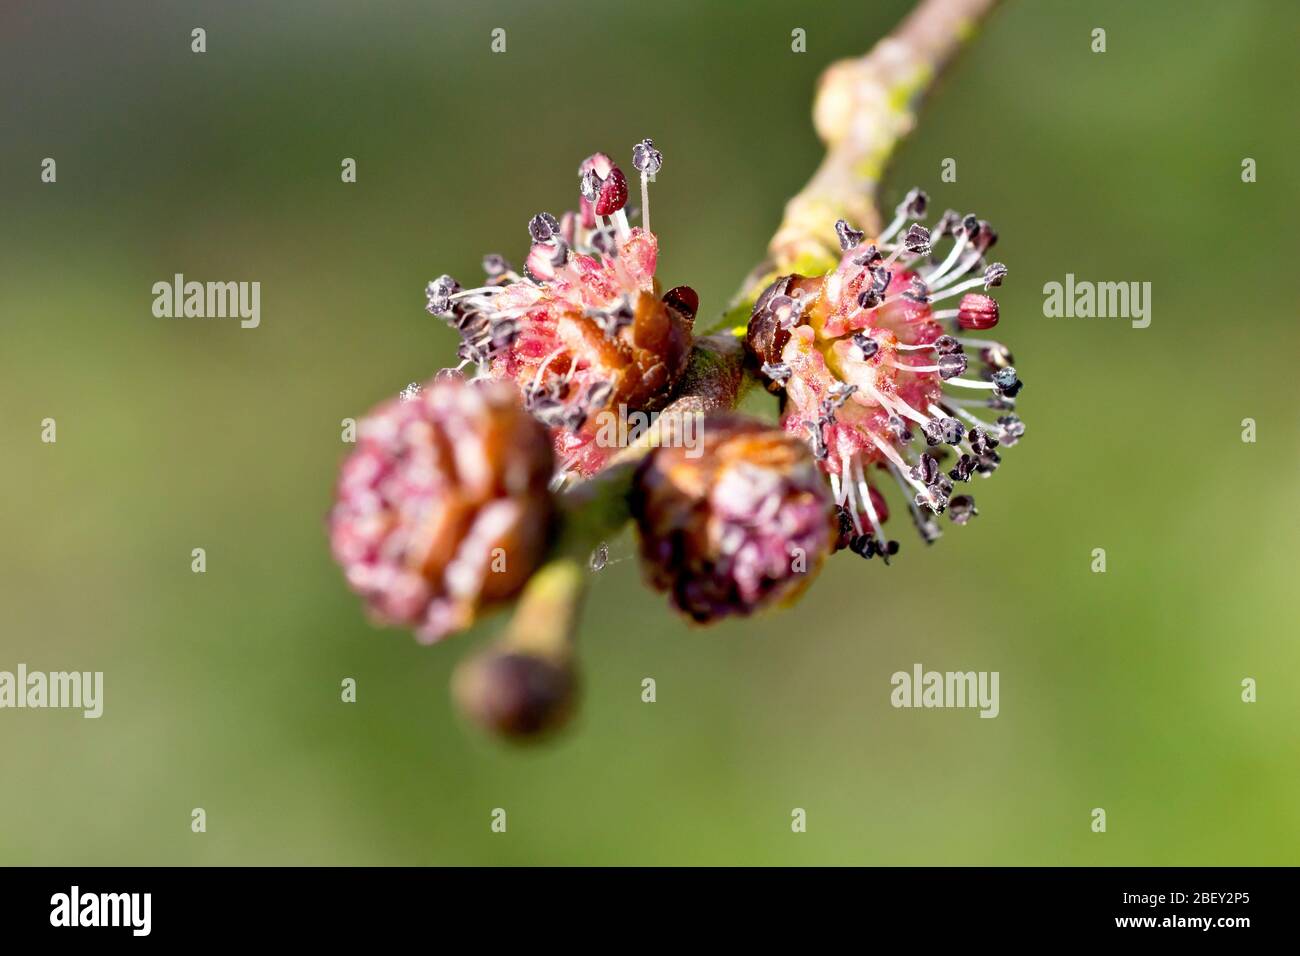 Wych Elm (ulmus glabra), close up of the flowers bursting into bloom on a branch, isolated against a plain background. Stock Photo